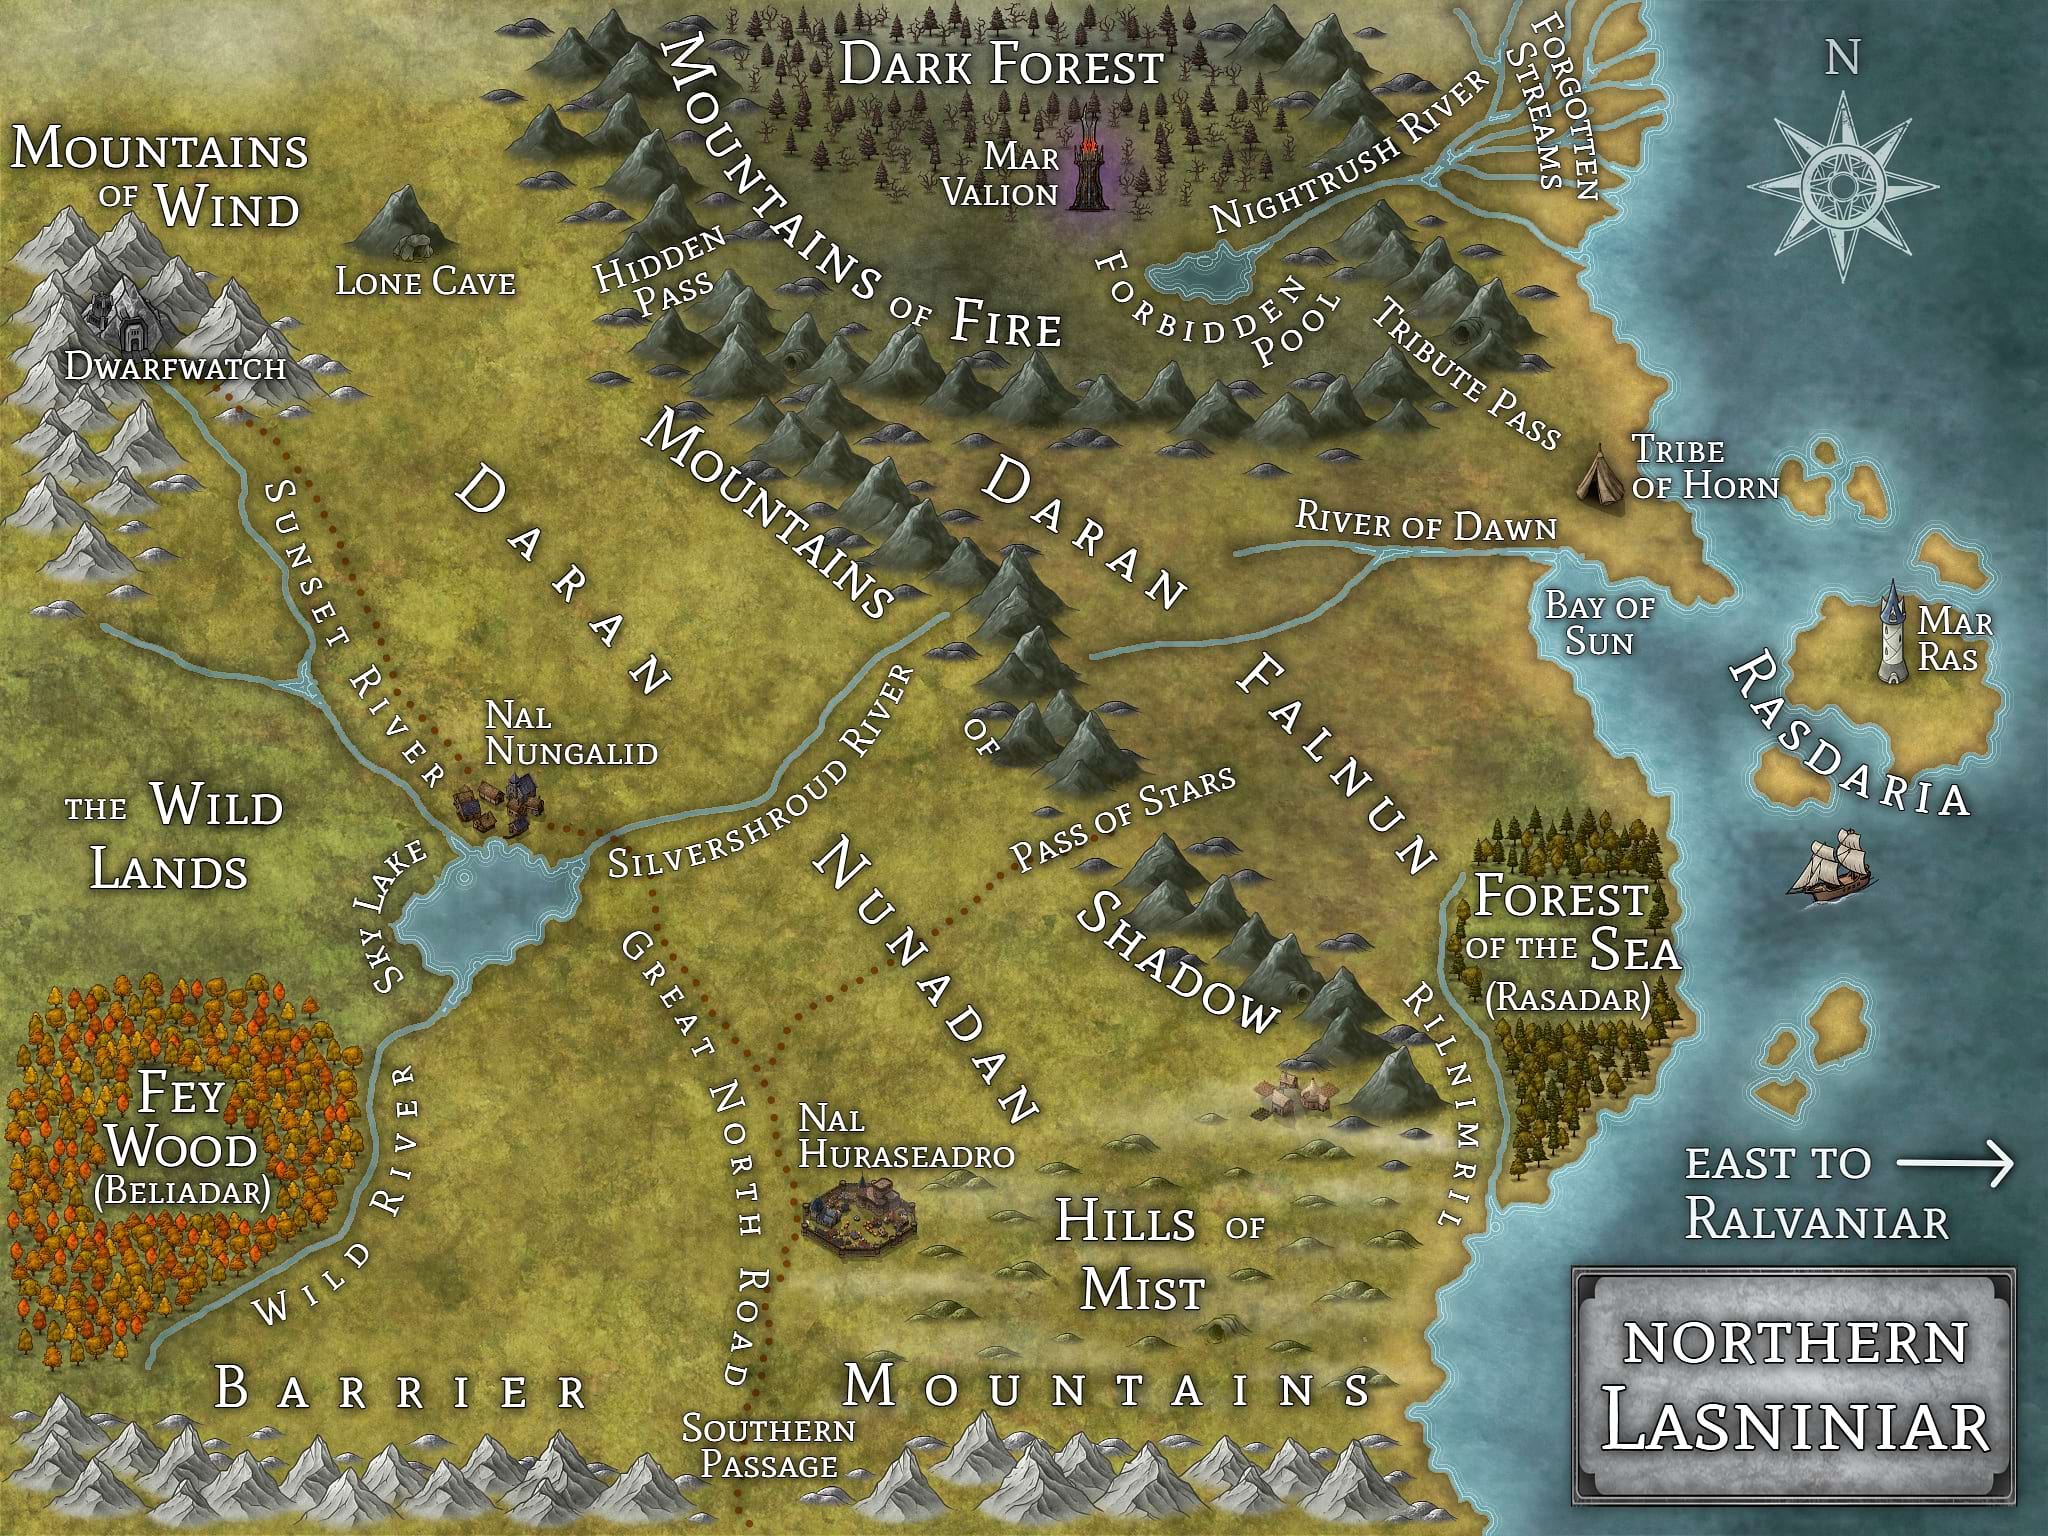 Map of Northern Lasniniar from the World of Lasniniar epic fantasy series